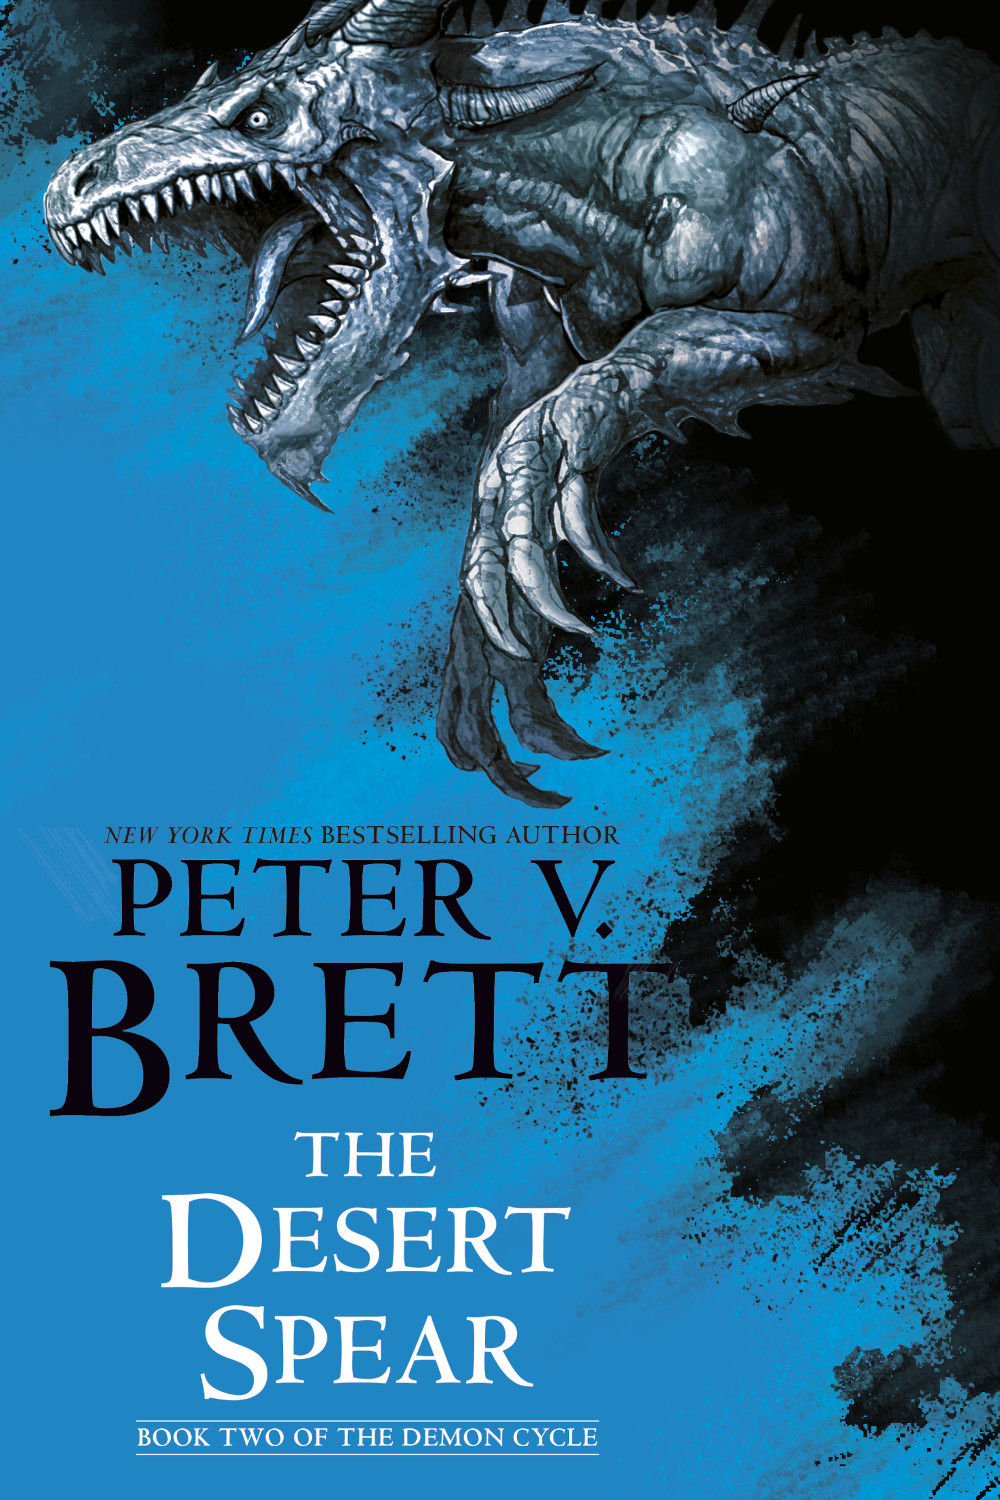 The Desert Spear by Peter V. Brett, Book Two of The Demon Cycle (US cover)